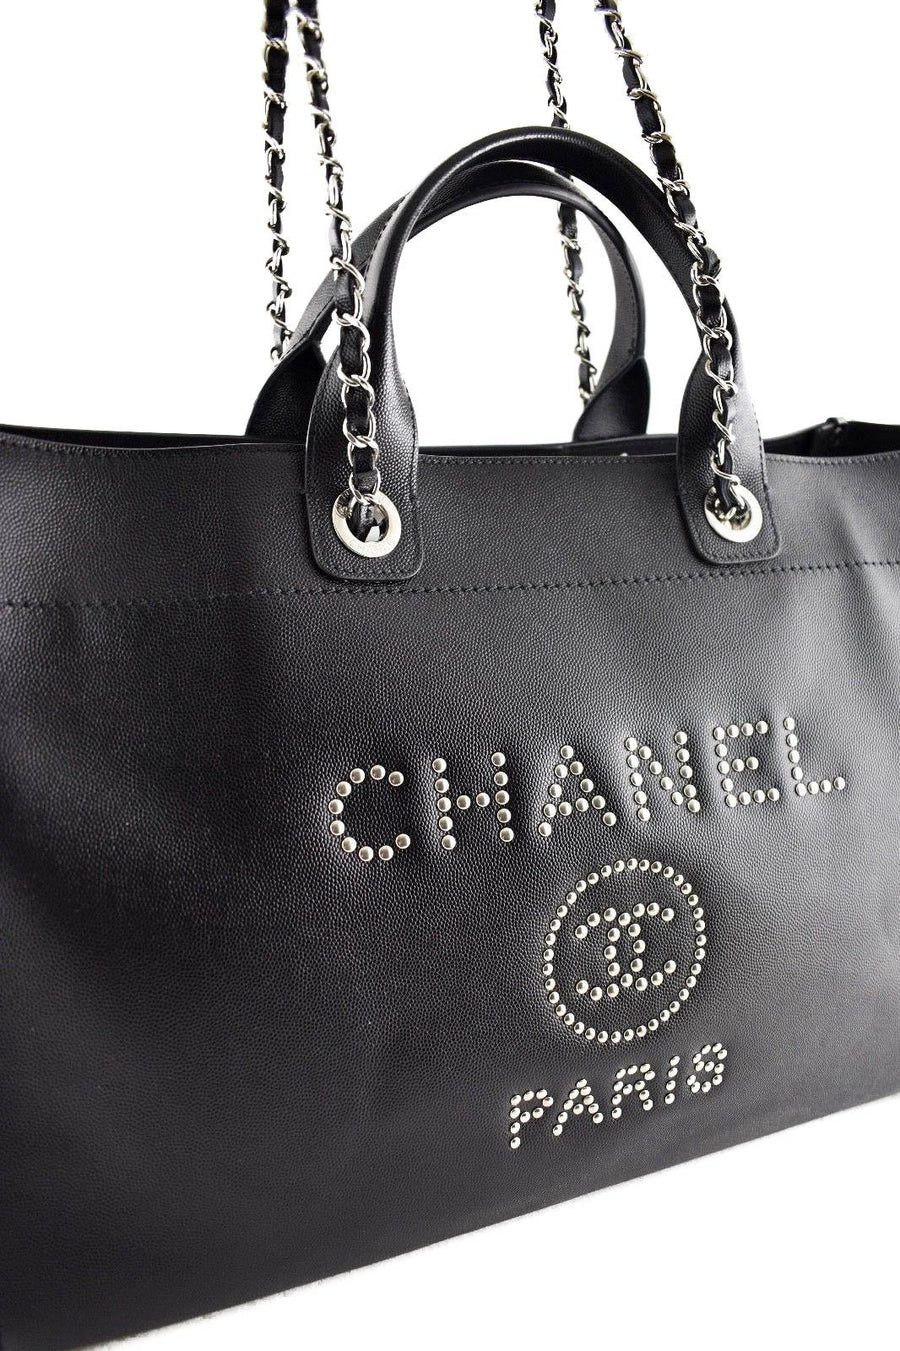 18P Deauville Black Caviar Extra Large CC Silver Studded Shopper Tote Bag CHANEL 